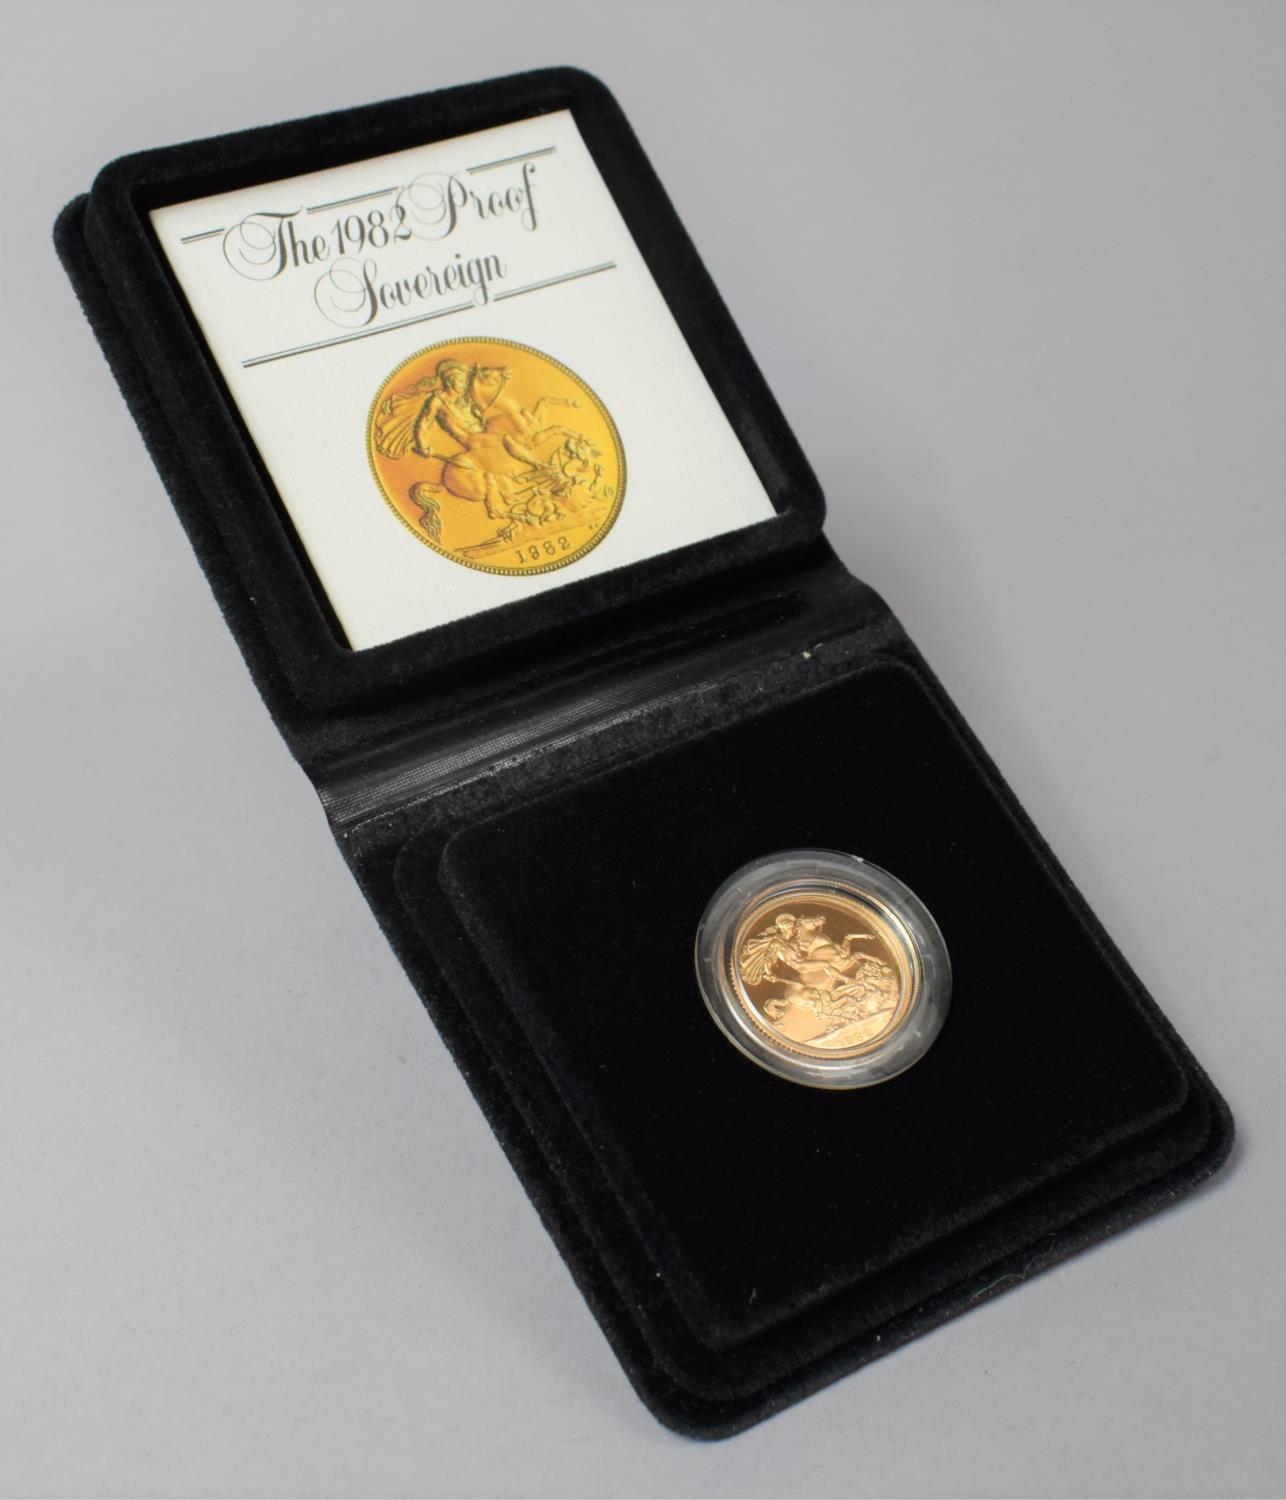 A 1982 Proof Sovereign In Royal Mint Presentation Case - Image 2 of 3